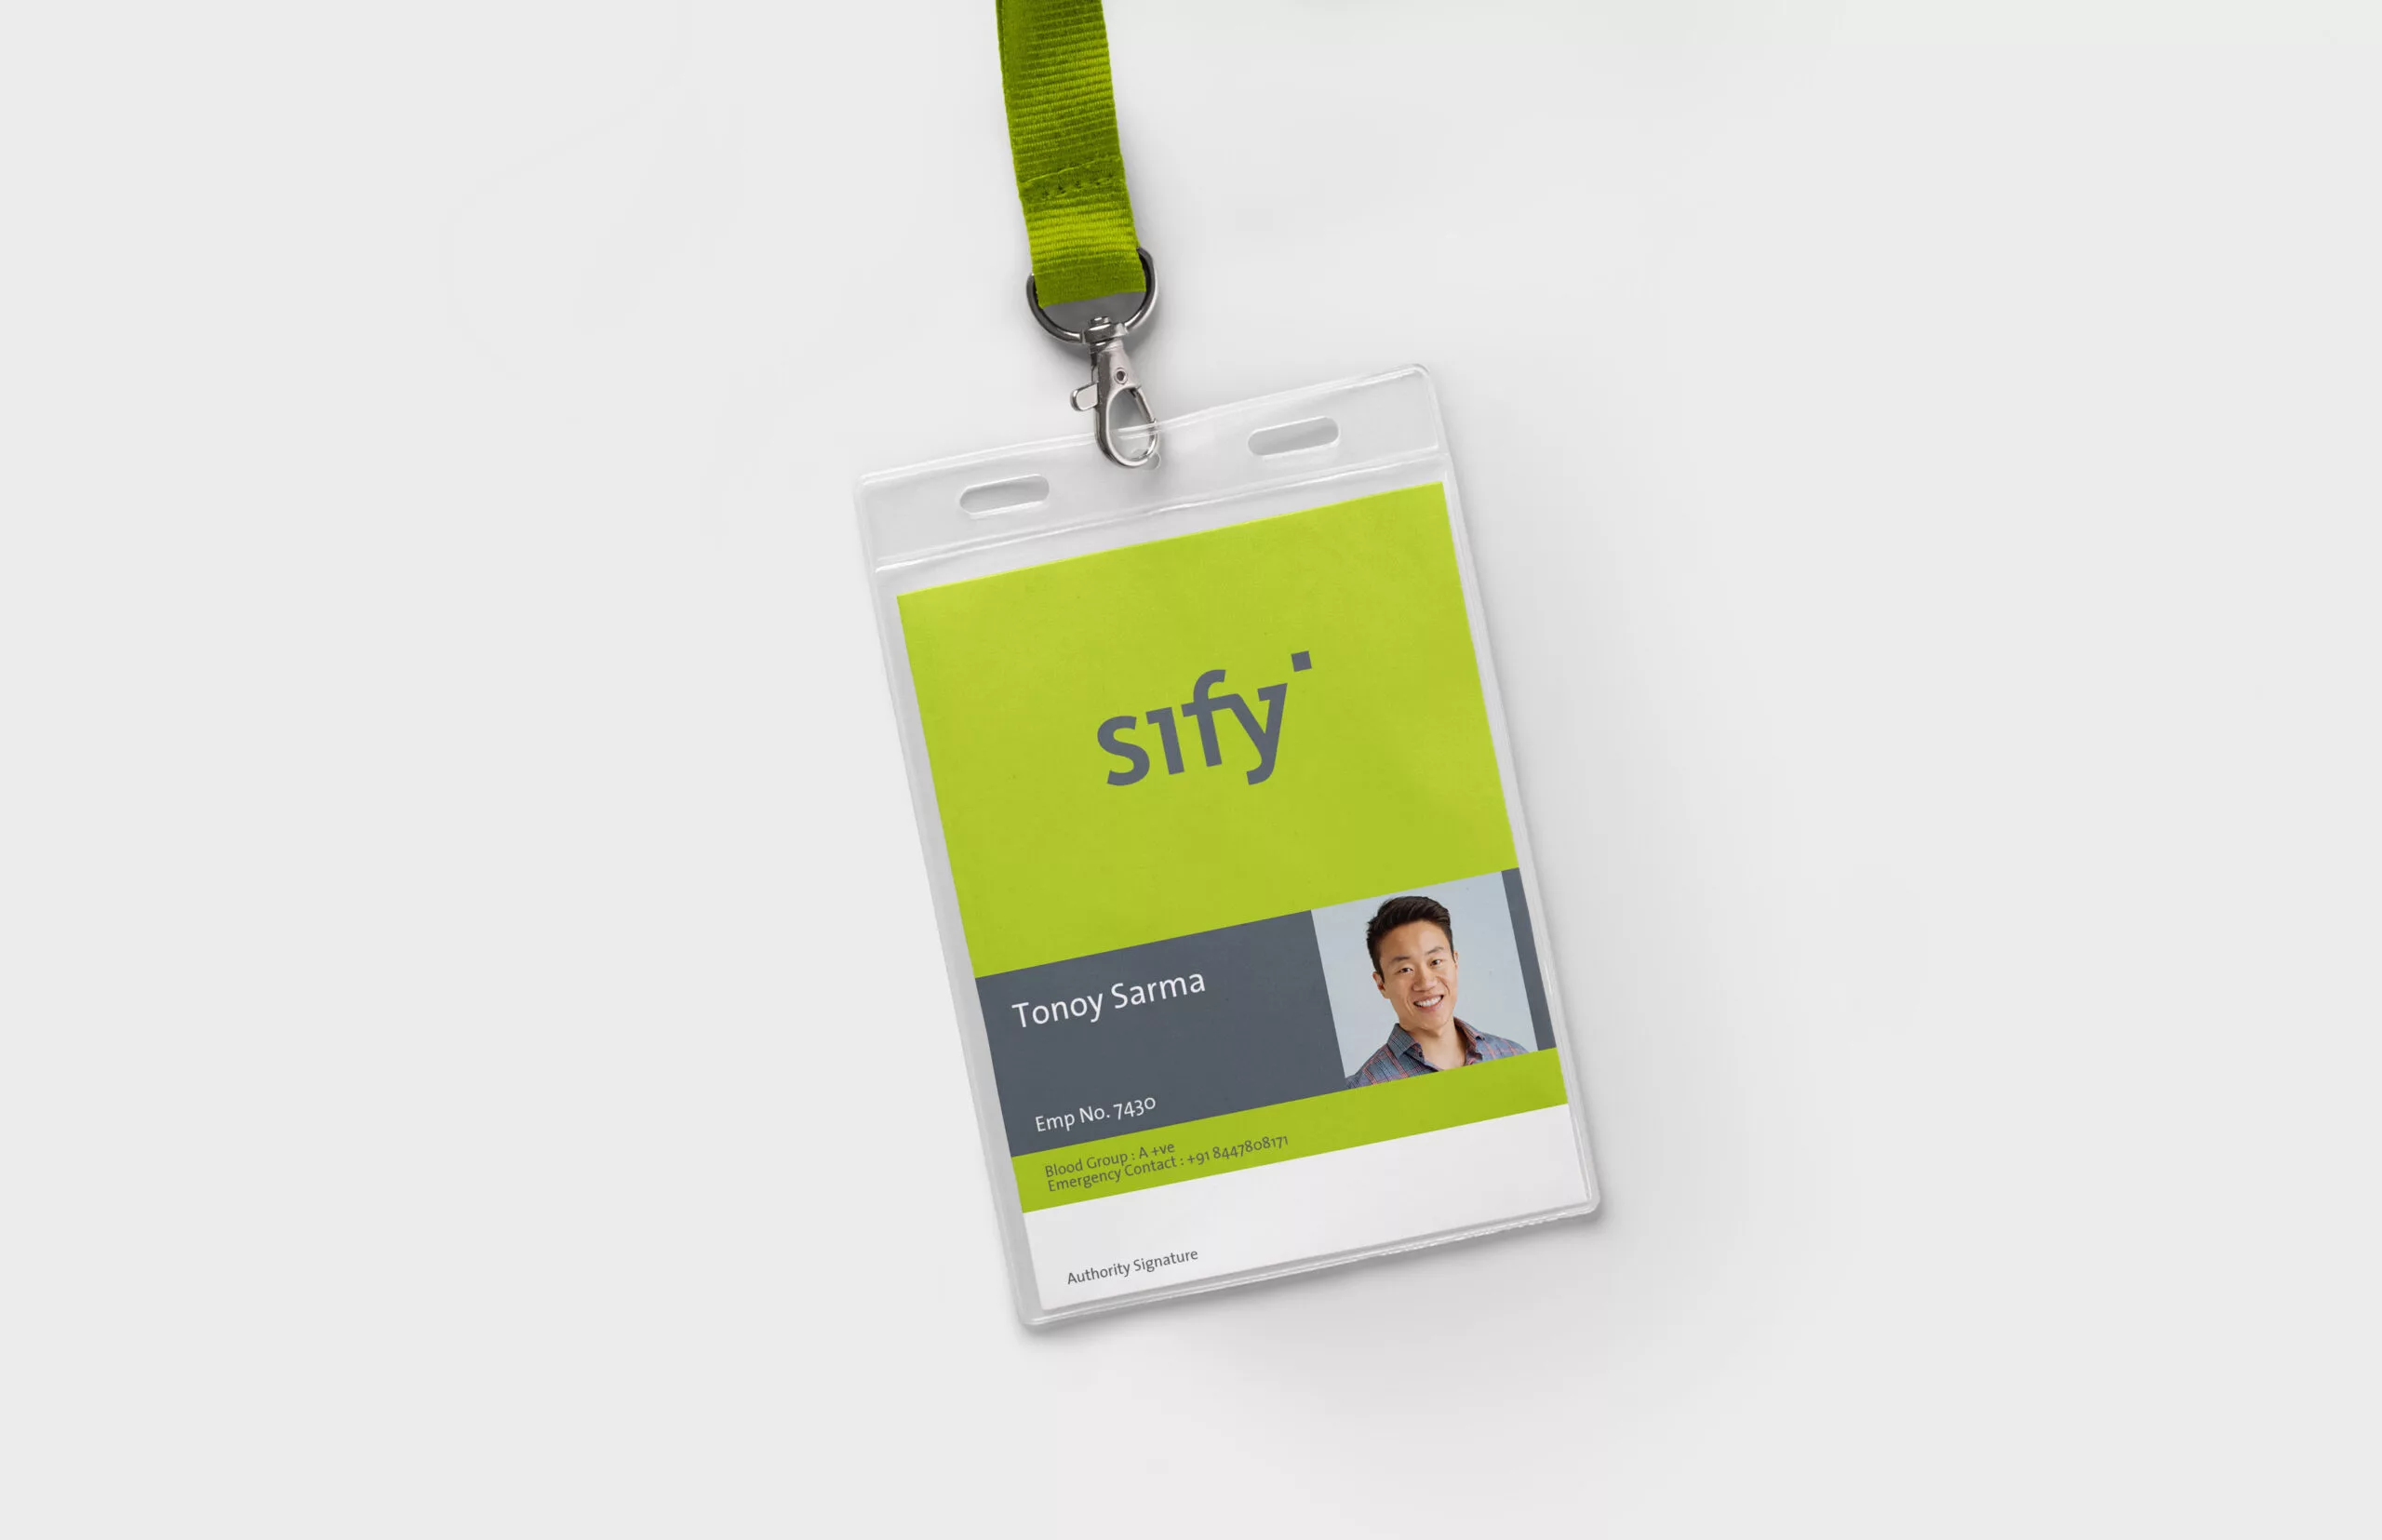 lopez-design-sify-id-card-scaled-mockup-people-branding